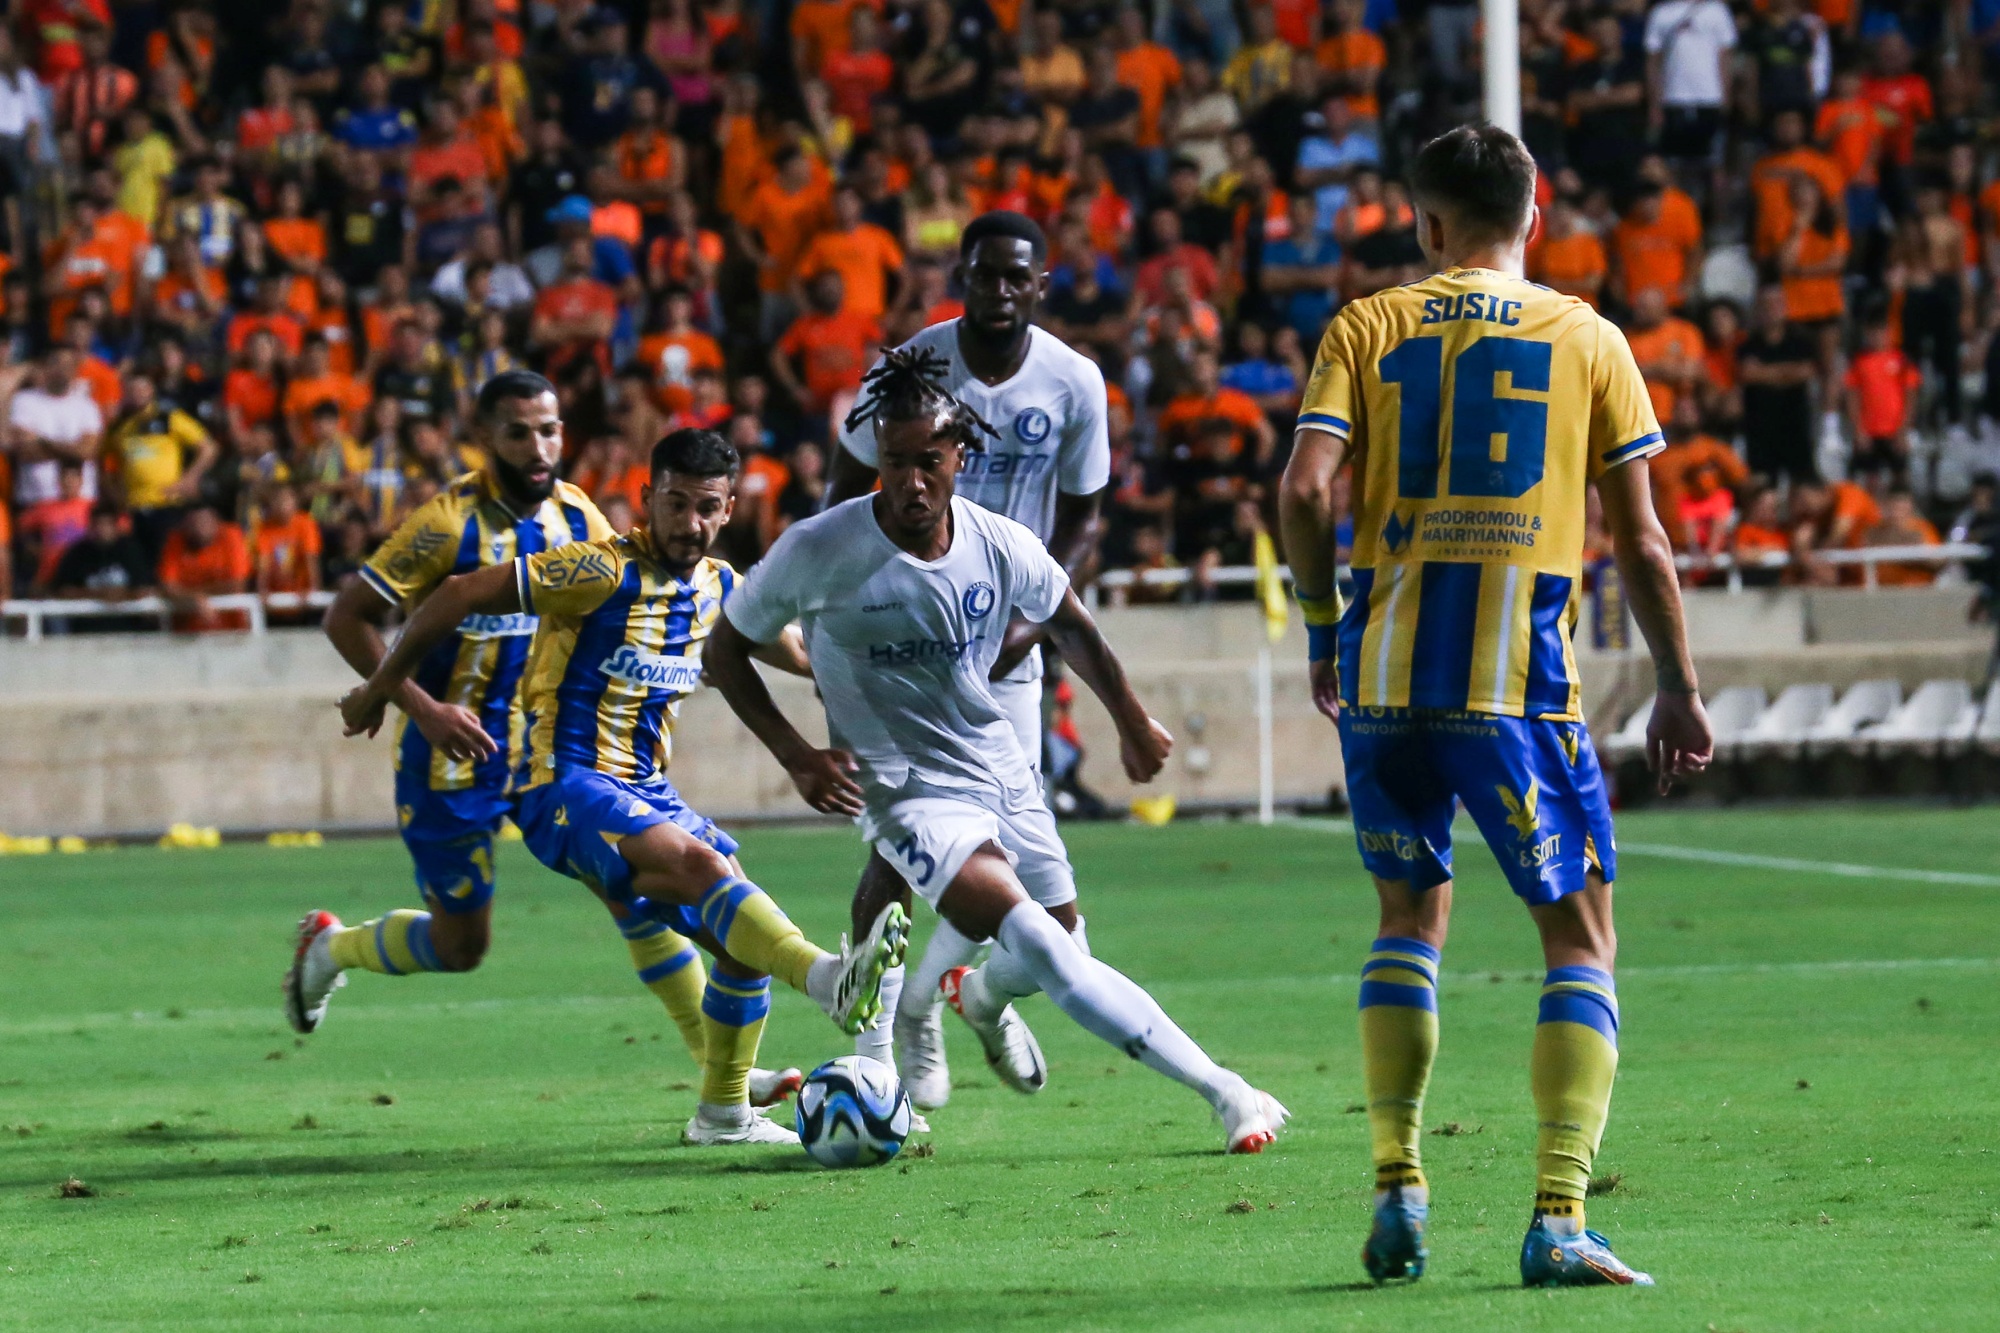 Gent's Archibald Archie Brown pictured in action during a soccer game between Cypriot APOEL FC and Belgian KAA Gent, Thursday 31 August 2023 in Strovolos, Cyprus, the return leg of the play-off for the UEFA Europa Conference League competition. BELGA PHOTO GEORGE CHRISTOPHOROU